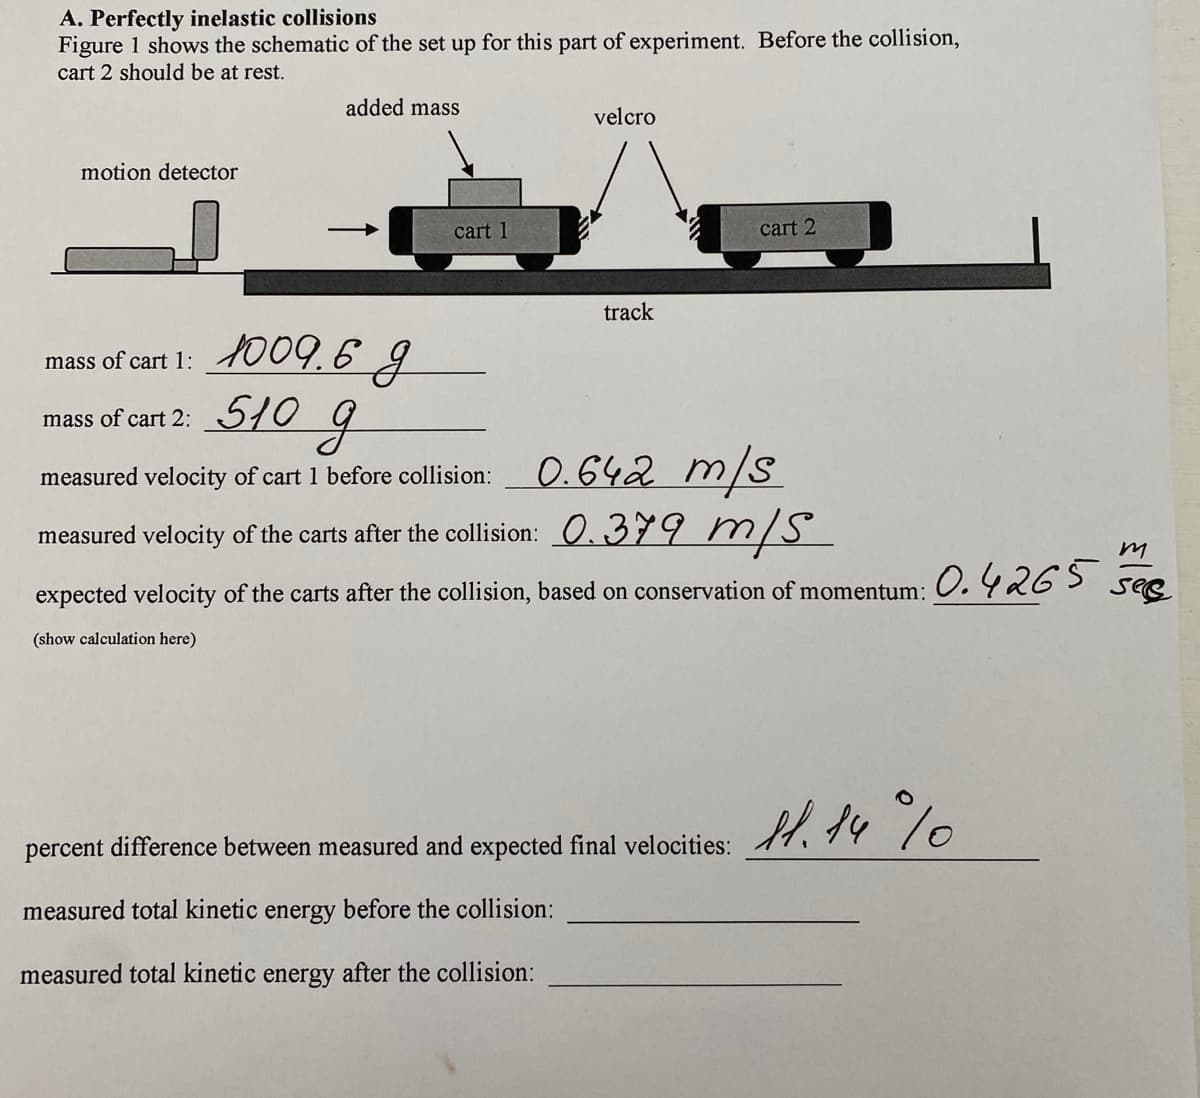 A. Perfectly inelastic collisions
Figure 1 shows the schematic of the set up for this part of experiment. Before the collision,
cart 2 should be at rest.
motion detector
added mass
cart 1
velcro
track
cart 2
mass of cart 1: 1009.6 g
g
mass of cart 2: 510
measured velocity of cart 1 before collision:
0.642 m/s
measured velocity of the carts after the collision: 0.379 m/s
expected velocity of the carts after the collision, based on conservation of momentum:
(show calculation here)
percent difference between measured and expected final velocities:
measured total kinetic energy before the collision:
measured total kinetic energy after the collision:
0.4265
11.14/0
m
see